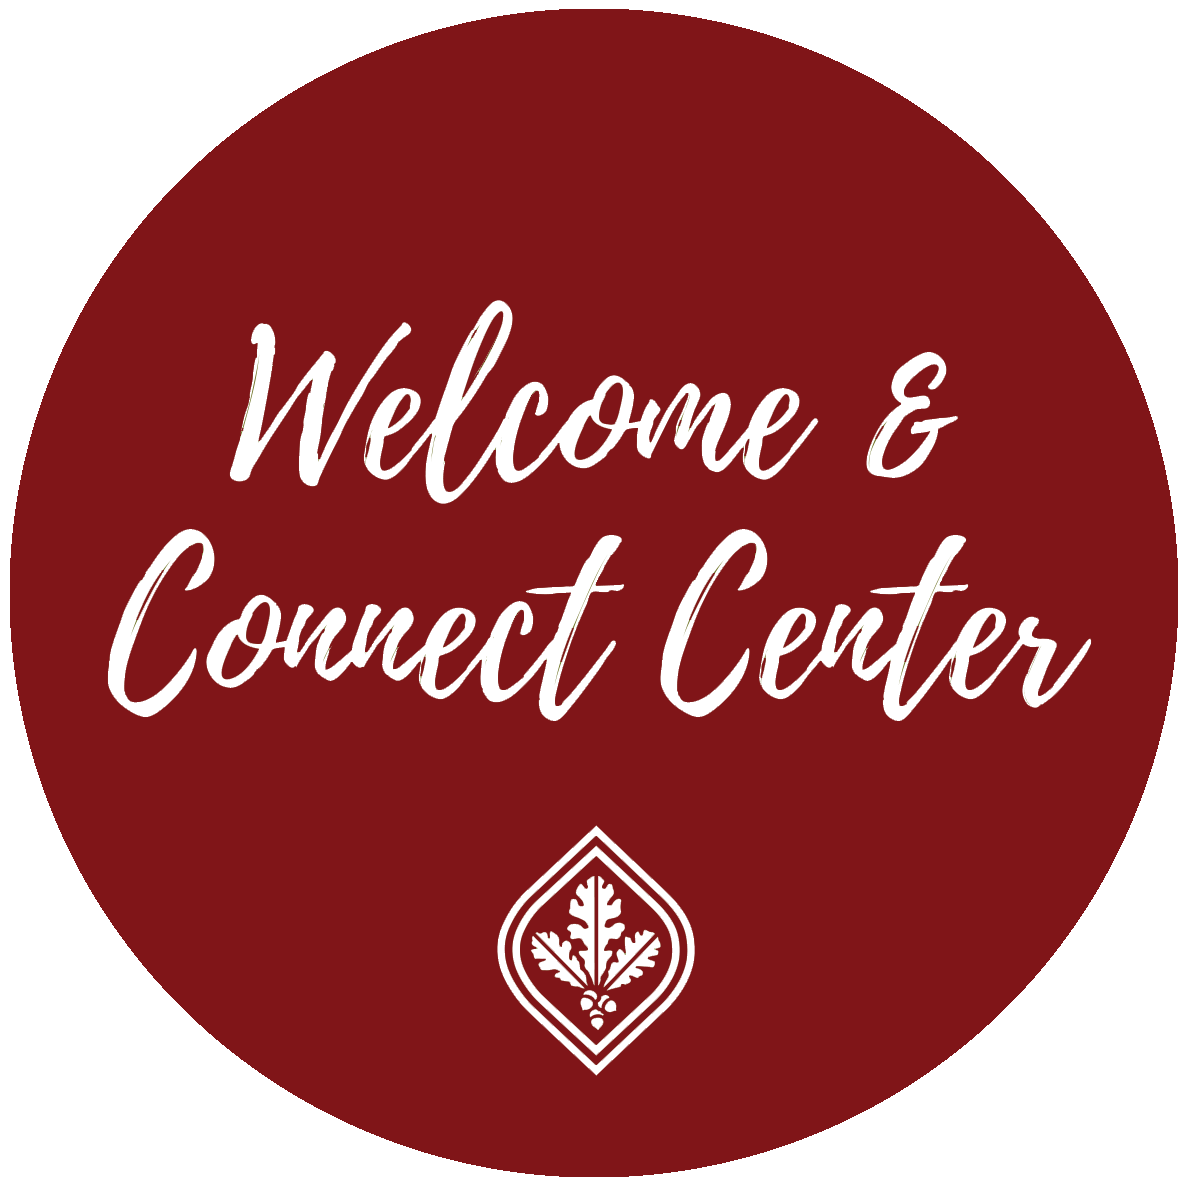 Santa Rosa campus Welcome & Connect